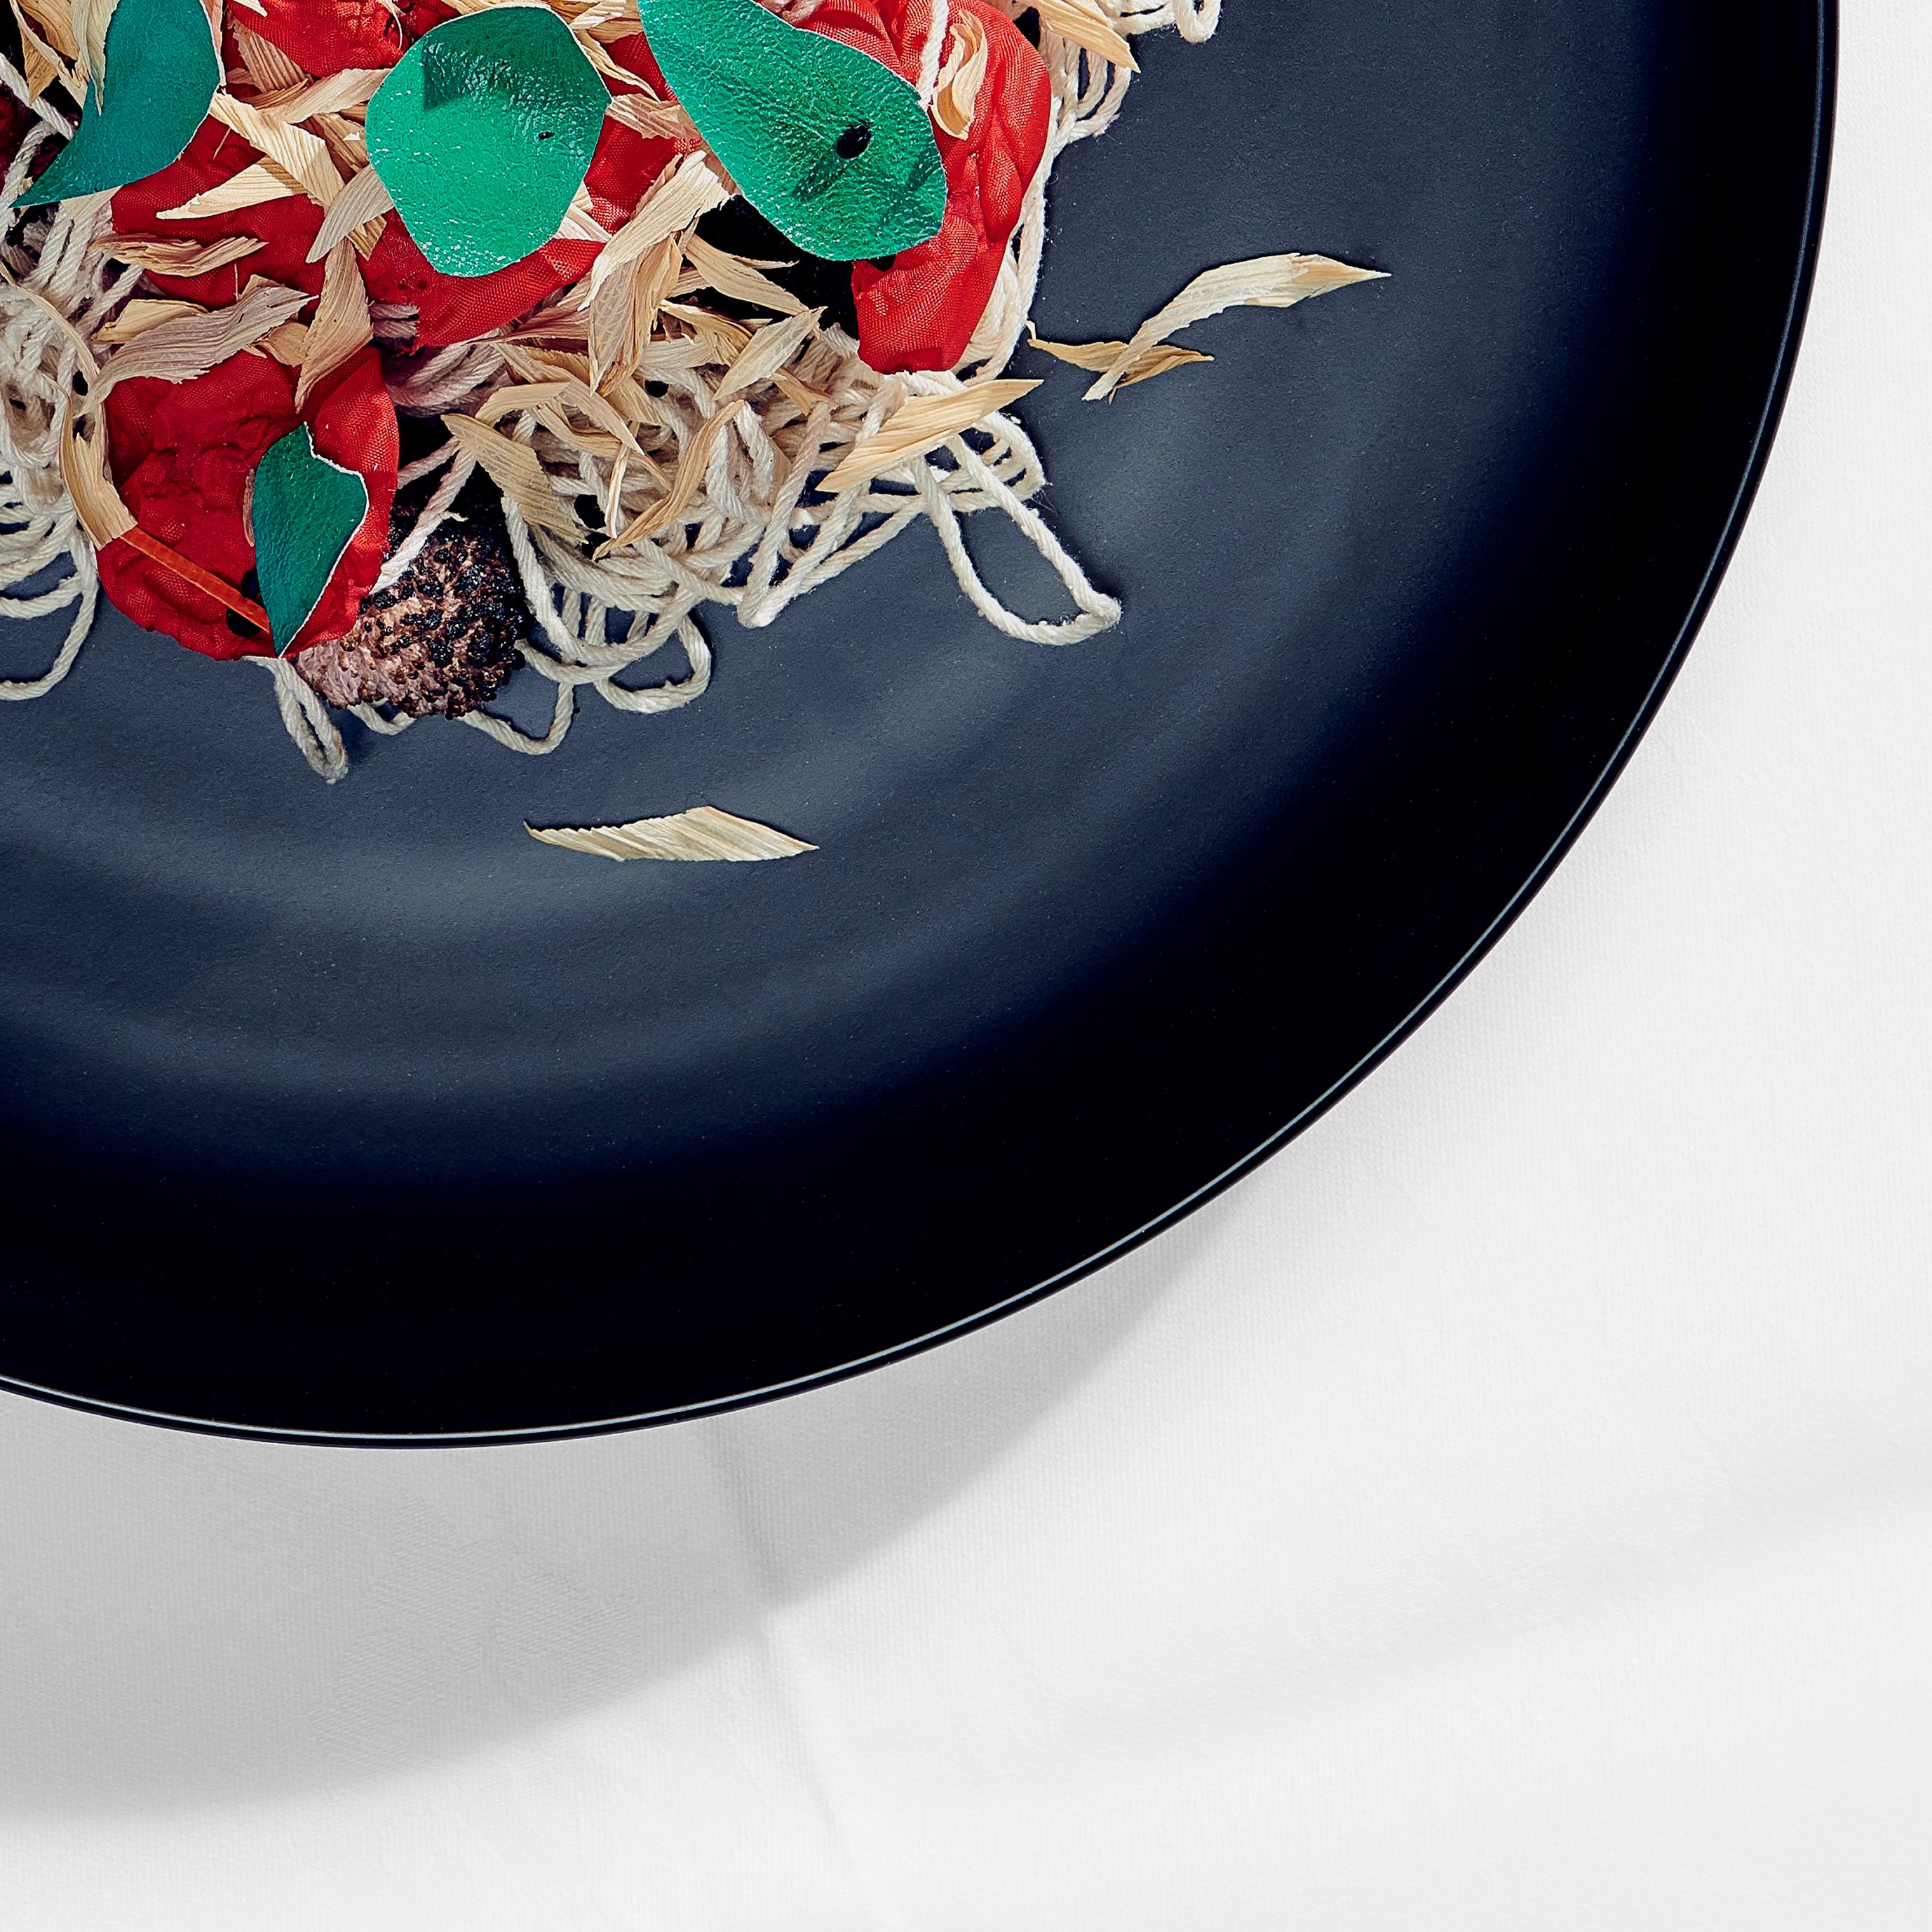 Photograph on C print.
The Spaghetti is made from rest over waste ingredients found a recycle waste facility in Rotterdam. Rubdish is a conceptual visualization of waste finding it’sway back onto your plate. It is the transformation of rubbish into